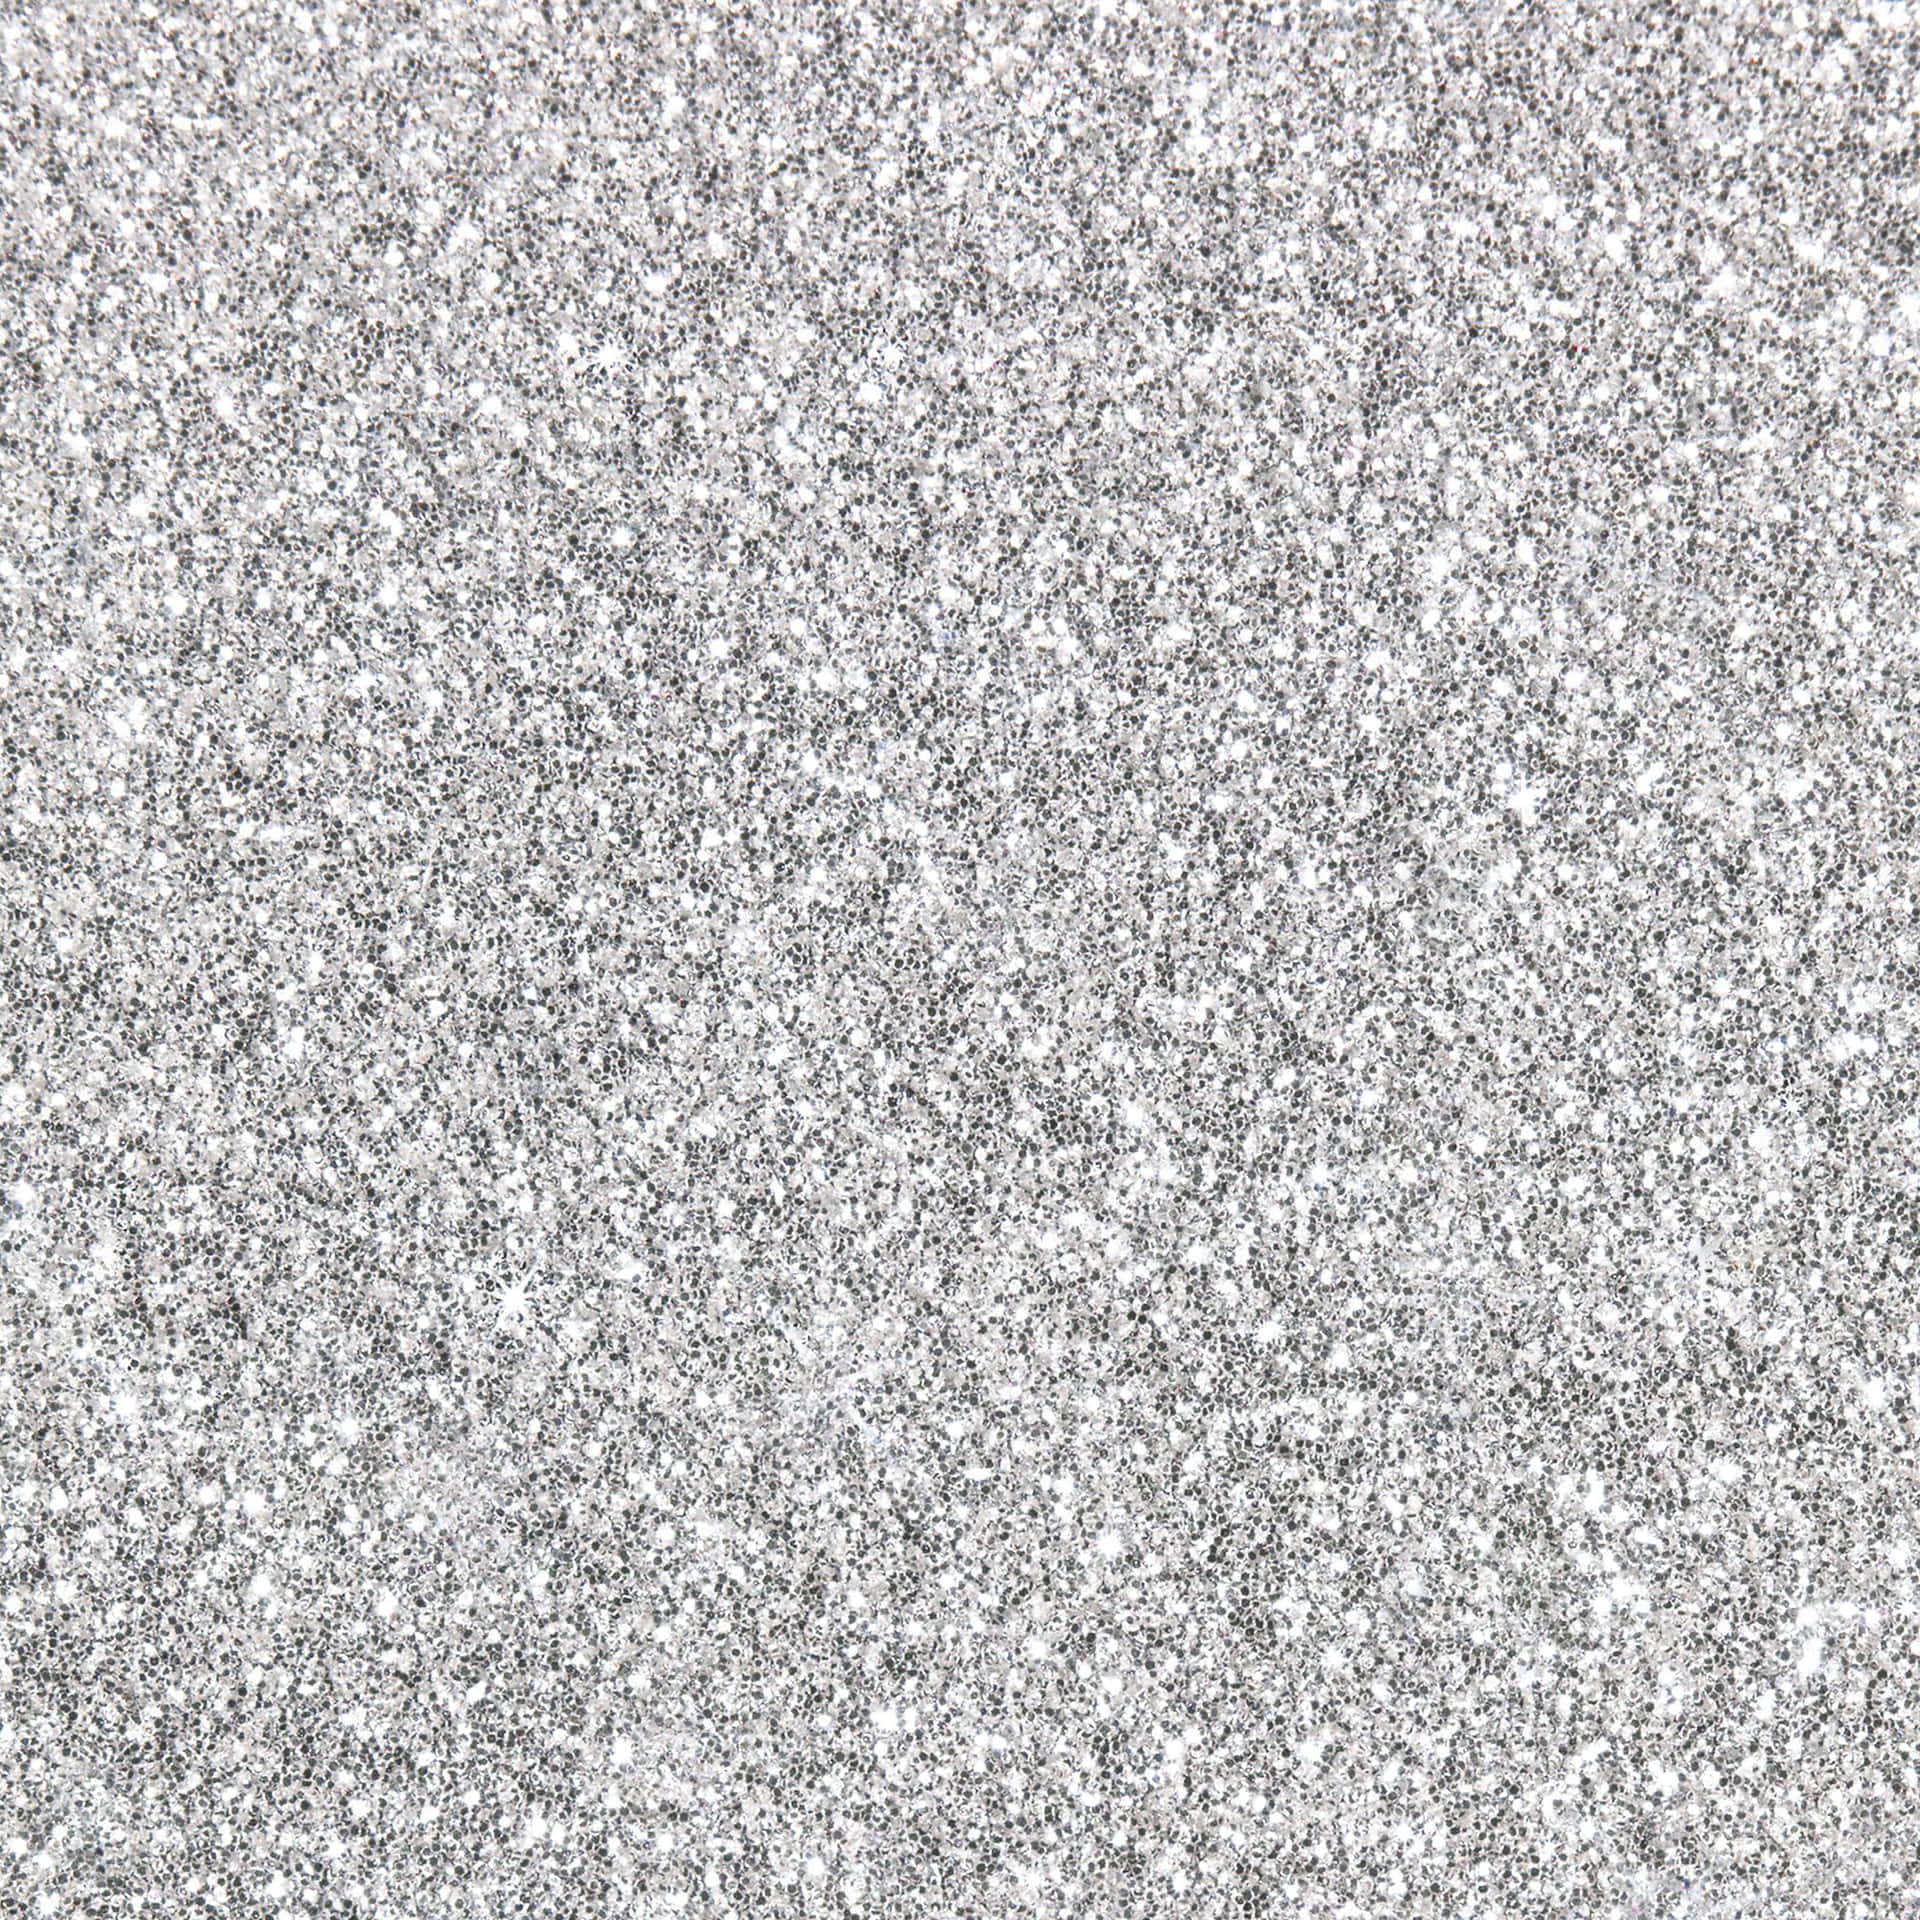 Add a touch of sparkle to your life with this beautiful Glittery Background